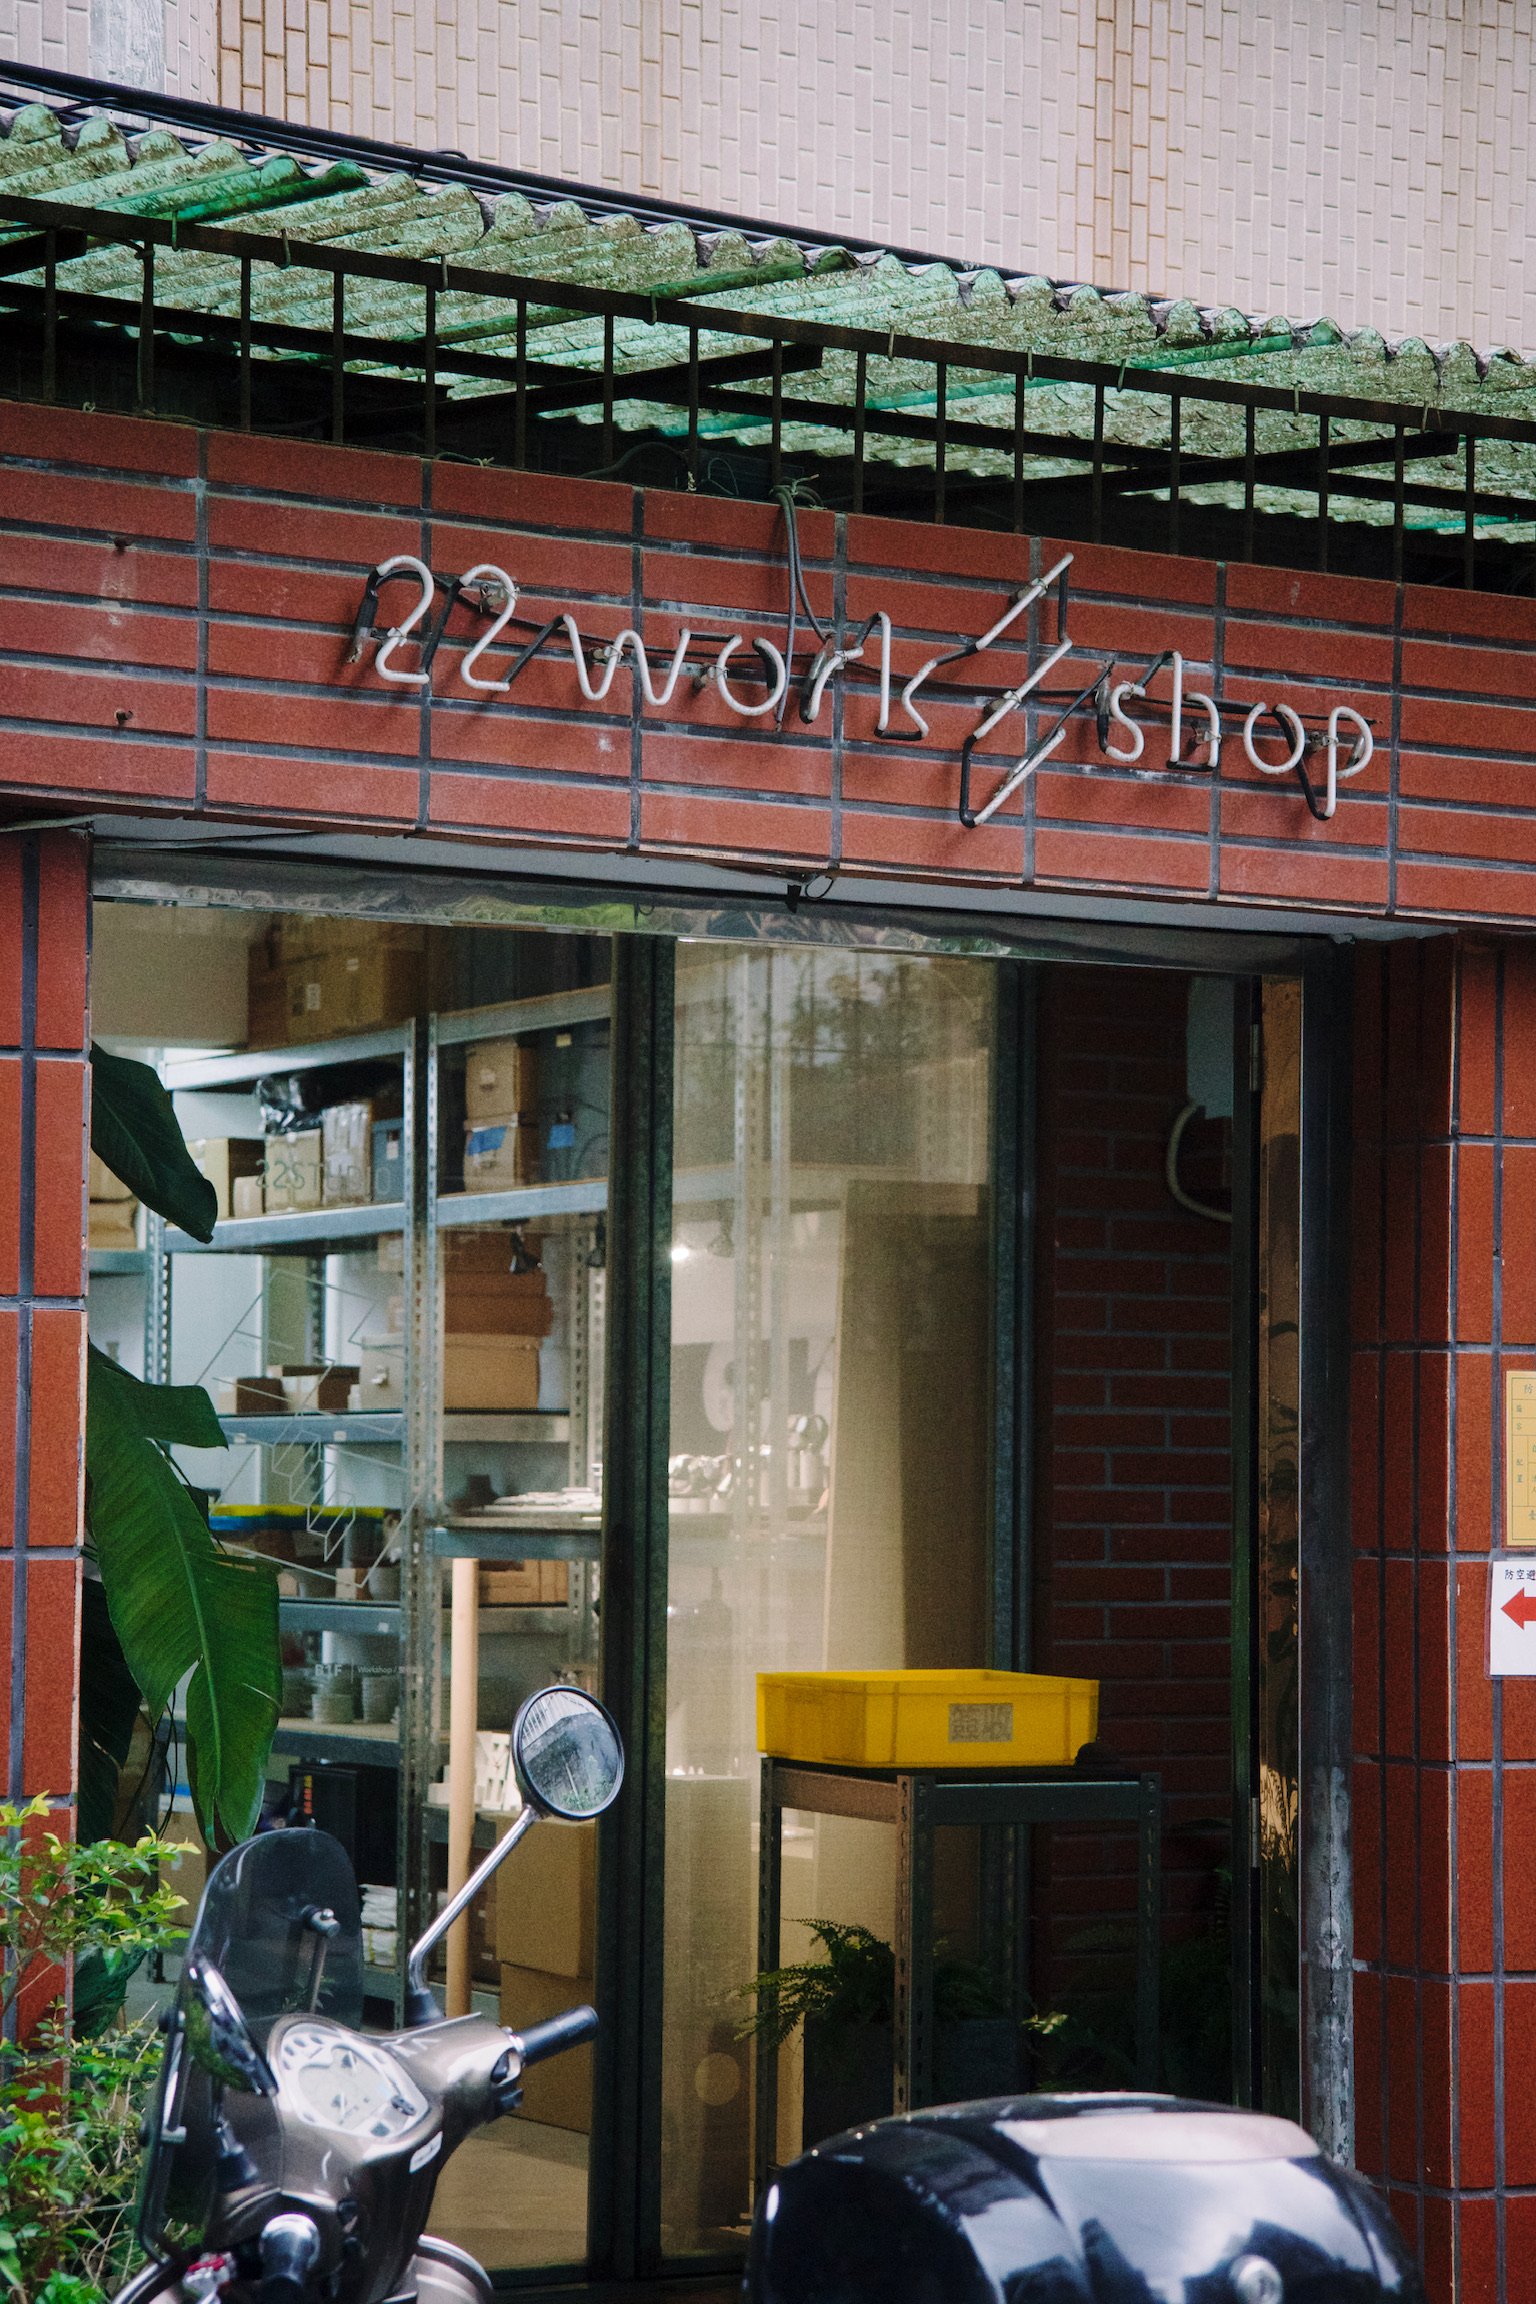 the entrance to 22 workshop, brick structure with neon sign and window doors.